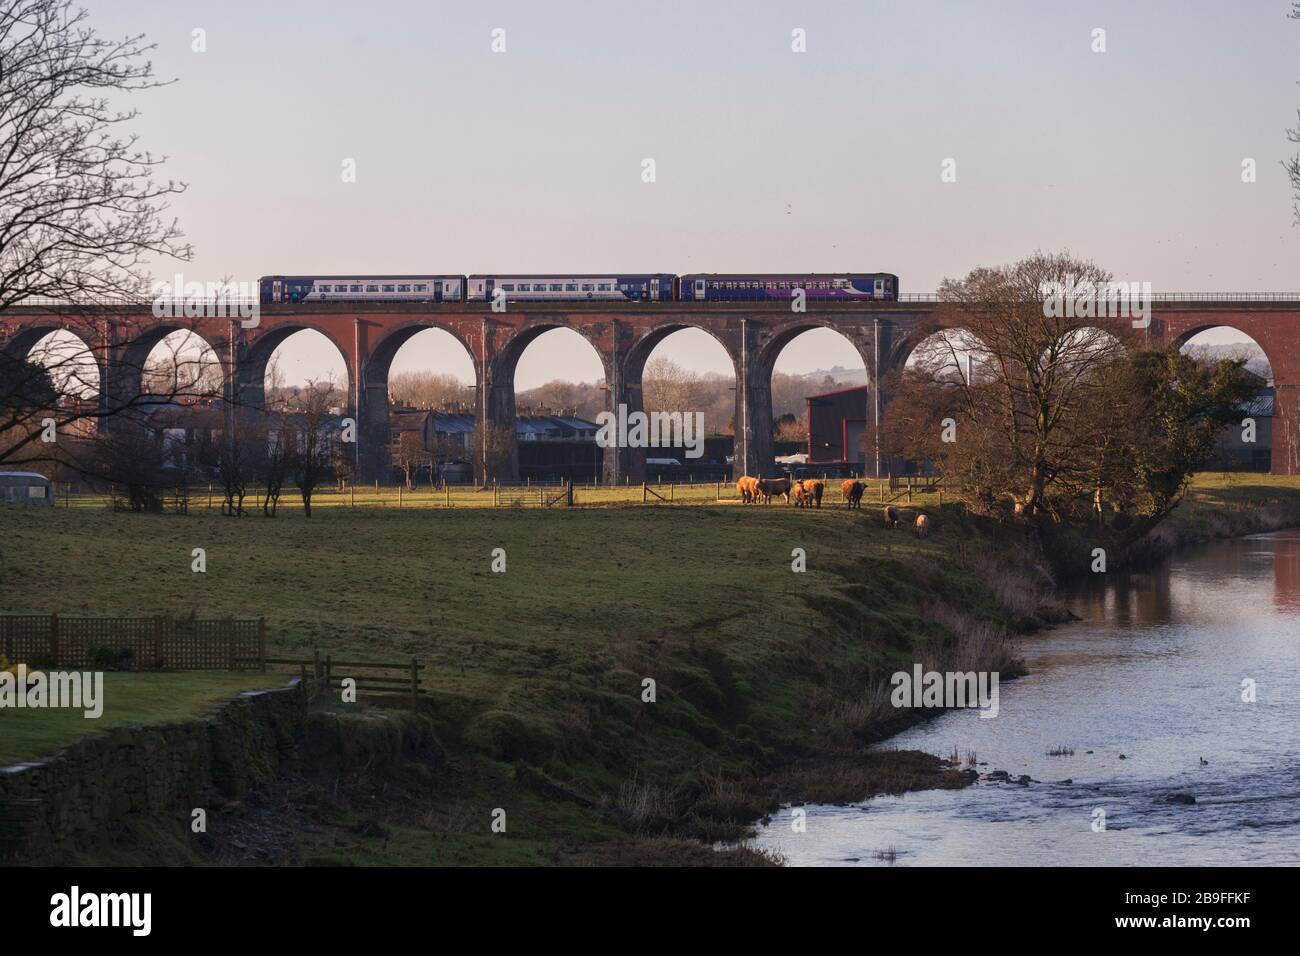 Northern Rail class 153 + class 158 sprinter trains crossing Whalley viaduct, Lancashire on the Ribble valley line. Stock Photo